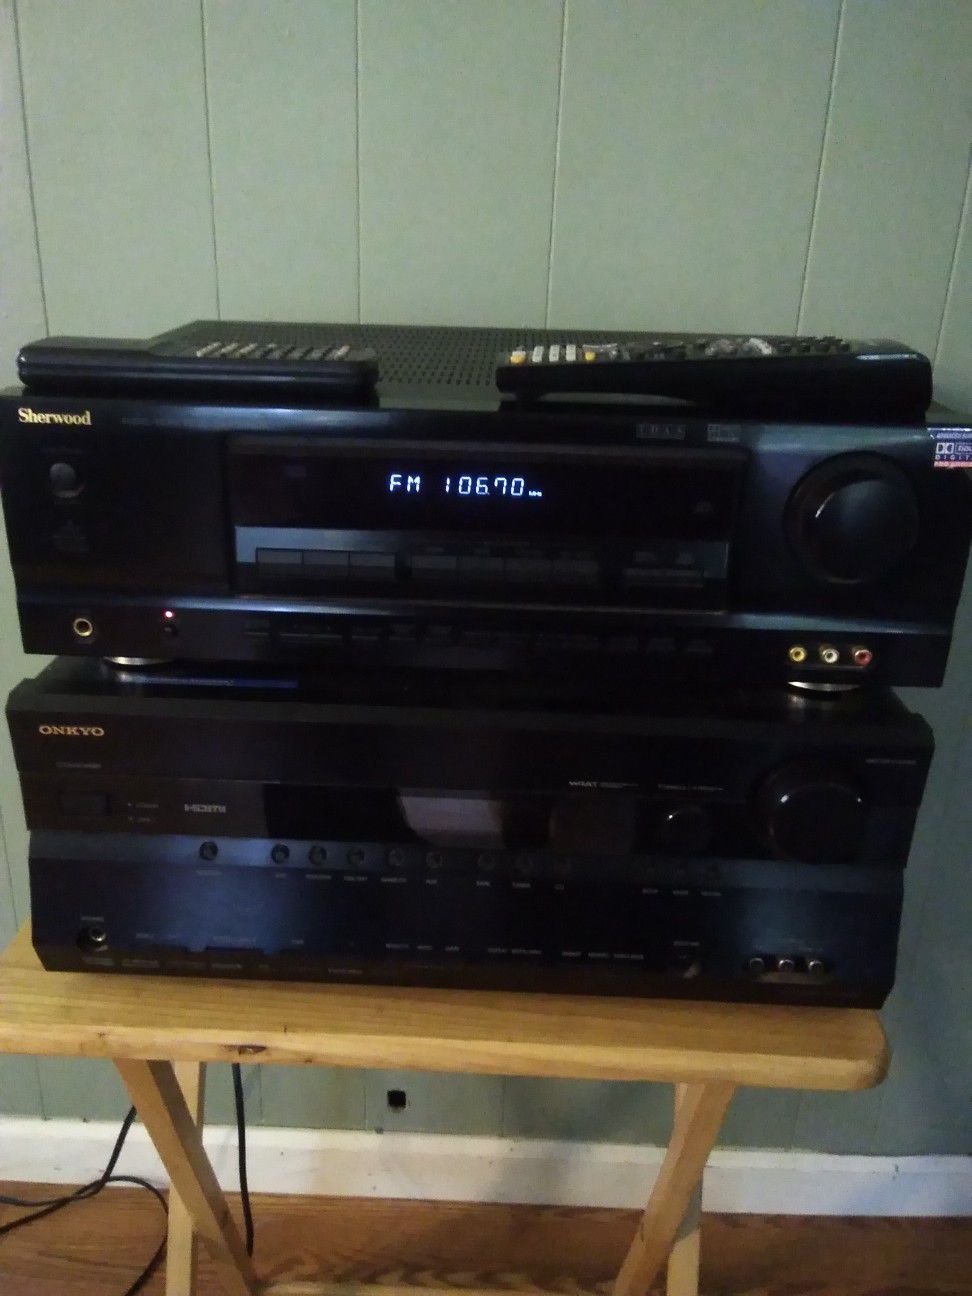 2 home audio video/receiver Rd 6500 Sherwood and ONKYO HDMI $35 each one